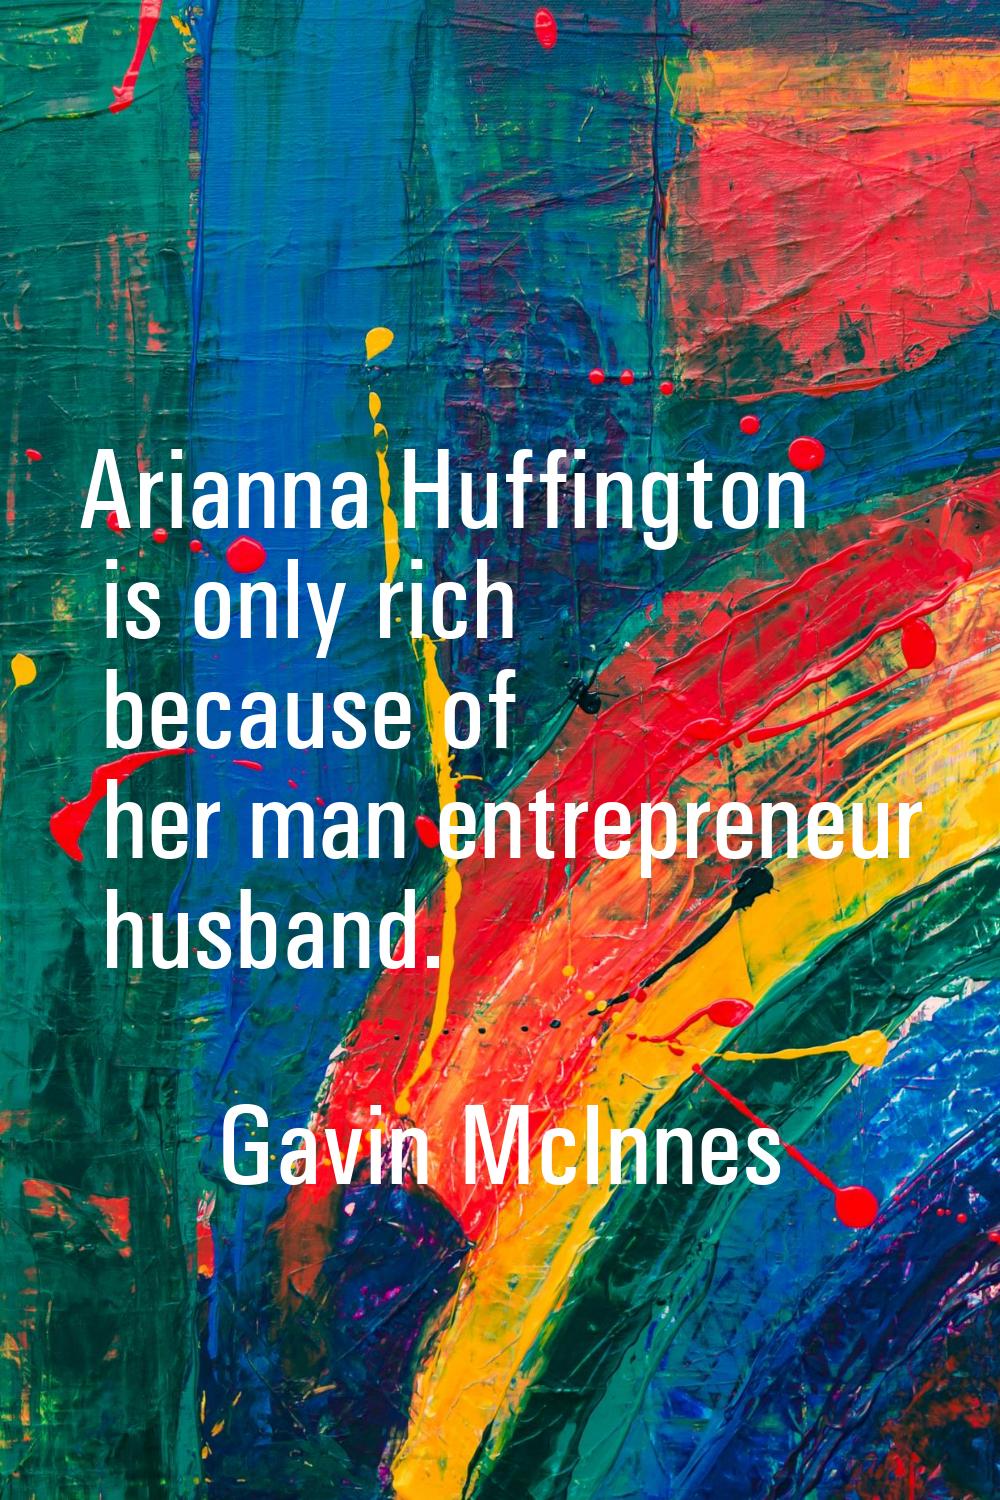 Arianna Huffington is only rich because of her man entrepreneur husband.